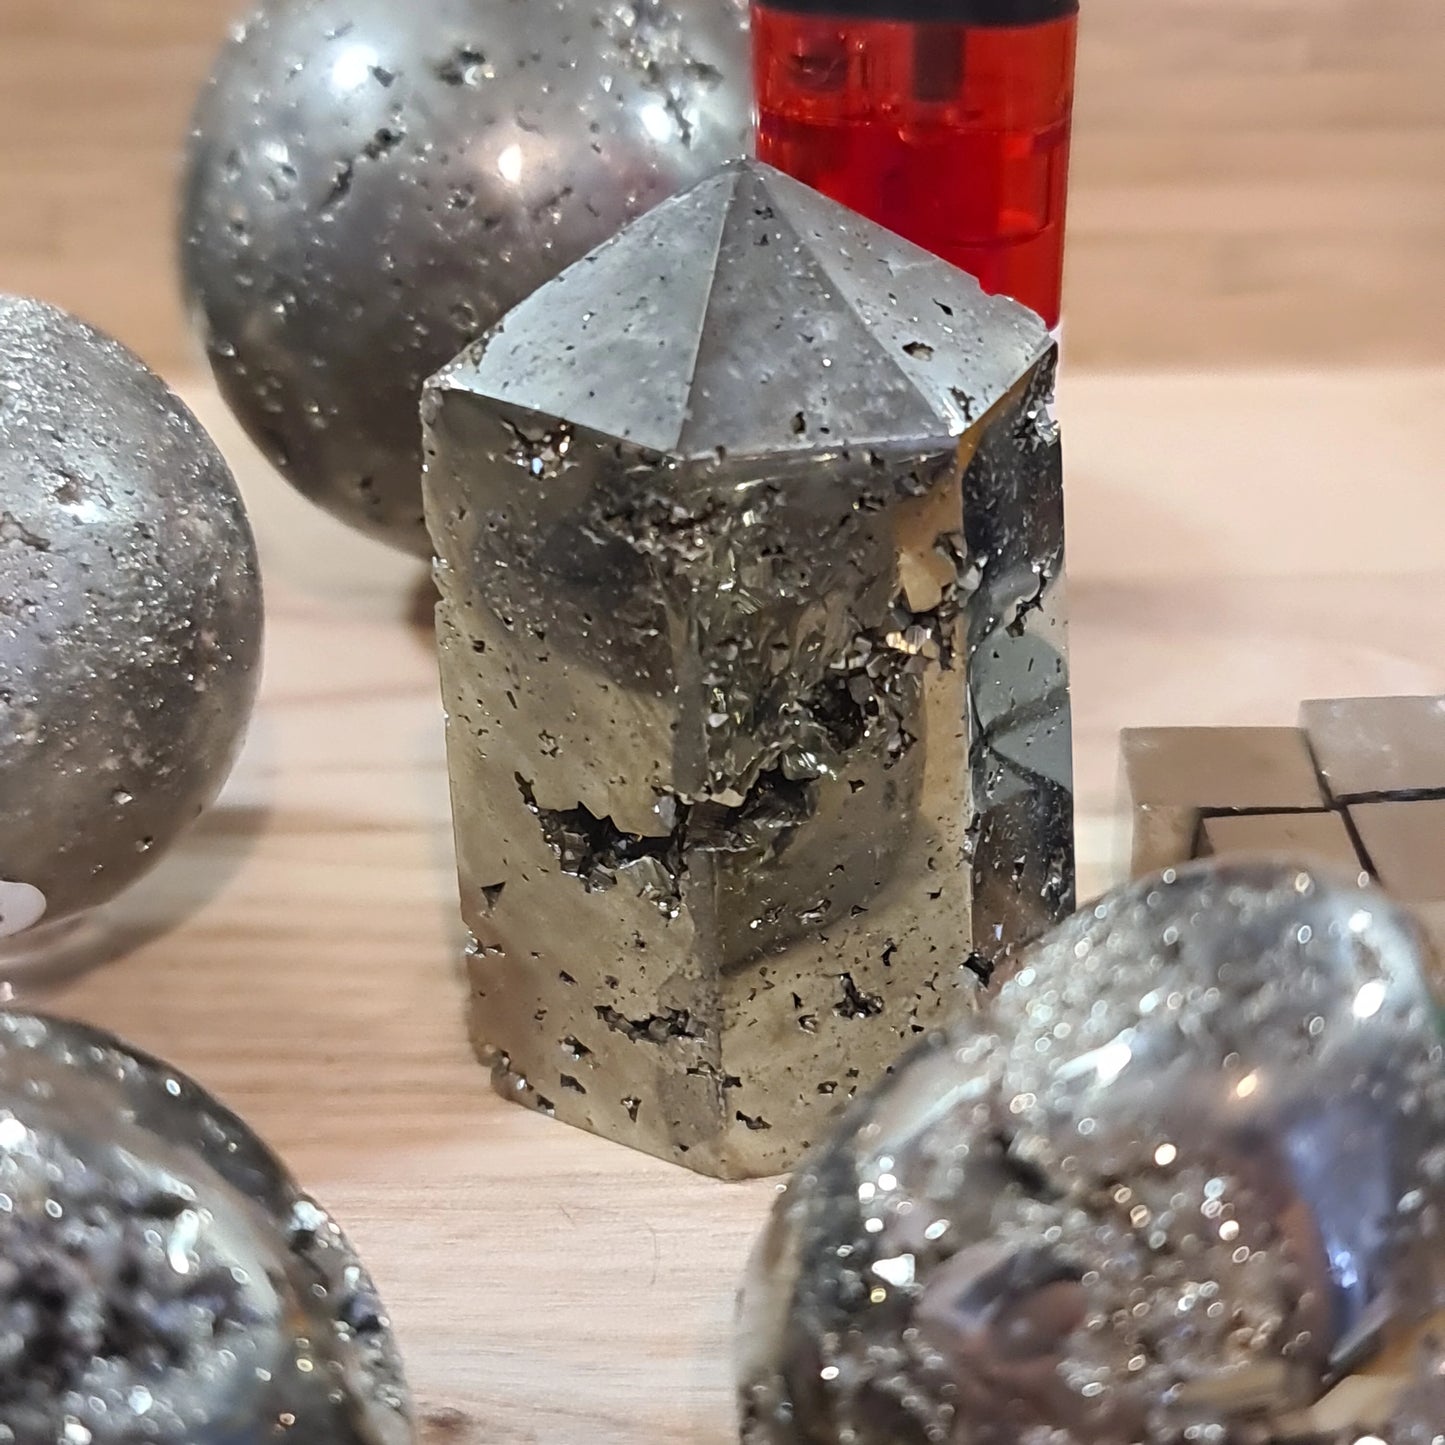 Pyrite Towers